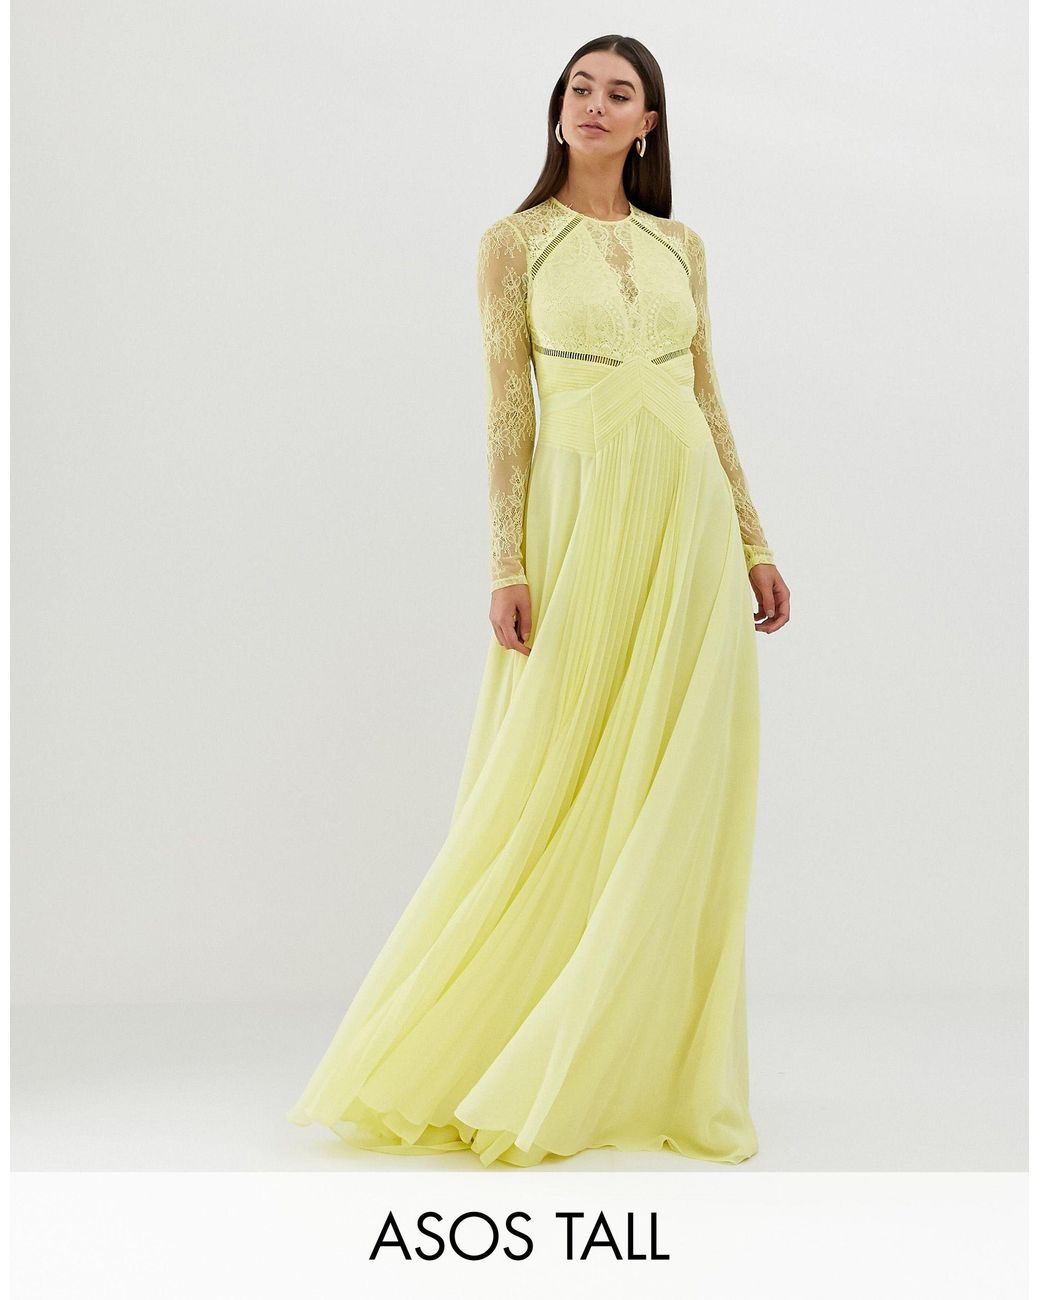 ASOS Asos Design Tall Long Sleeve Lace Panelled Pleat Maxi Dress in Yellow  | Lyst UK